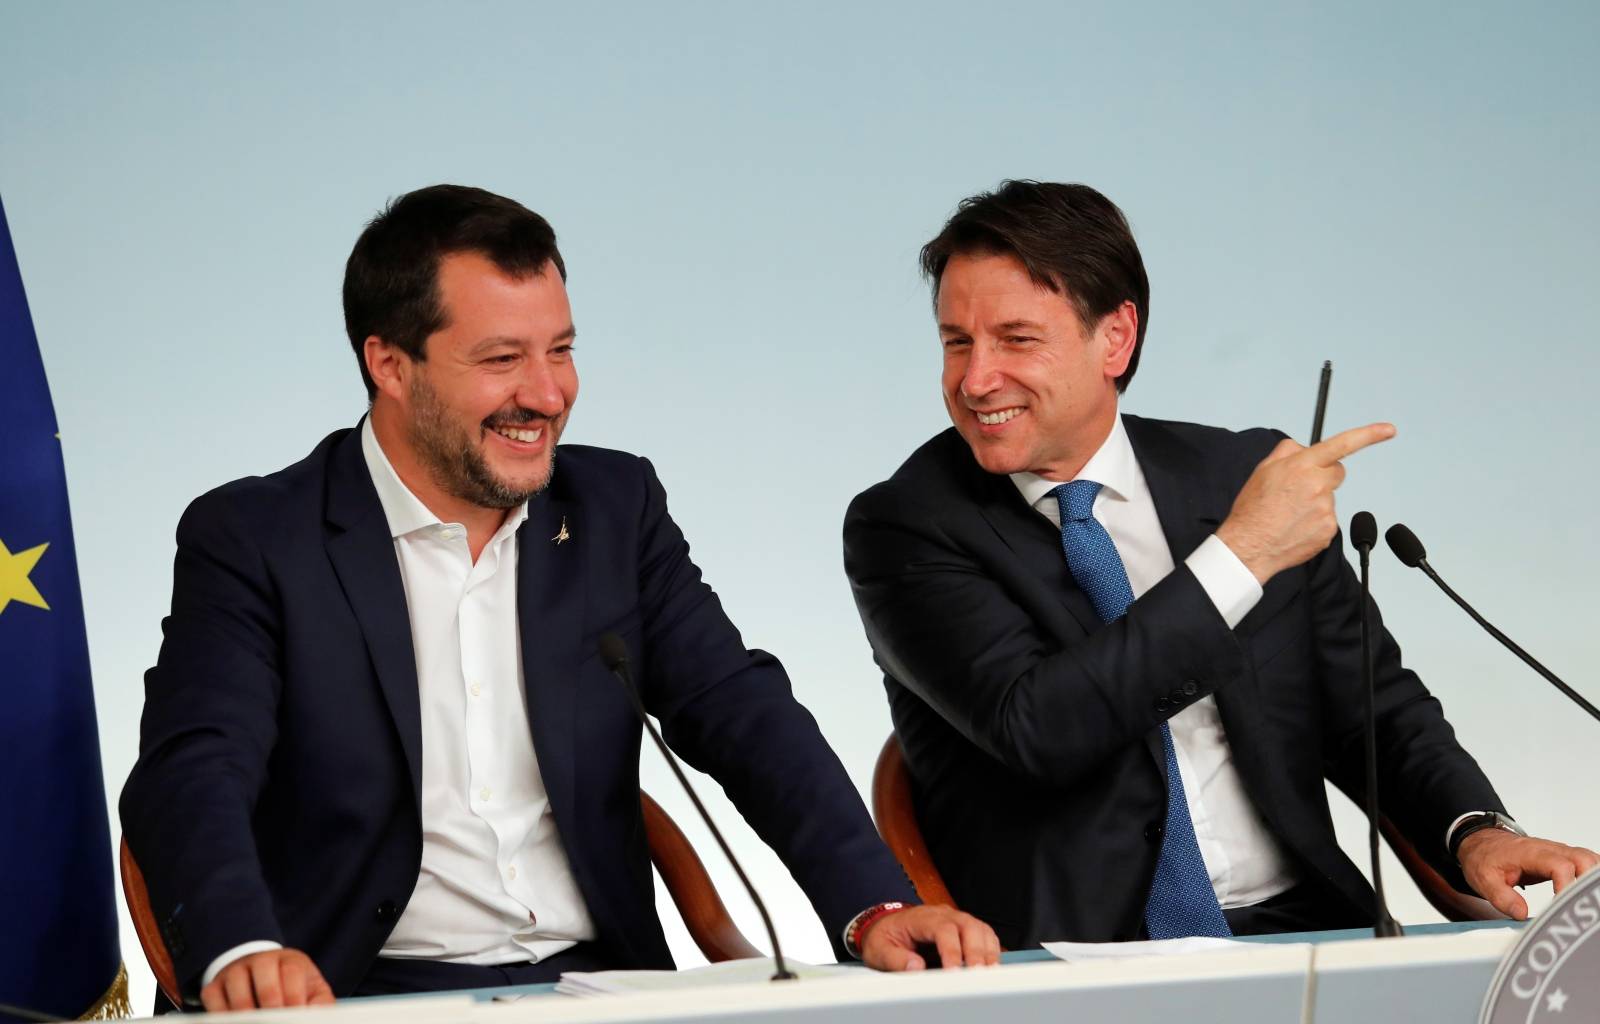 Italian PM Conte and Deputy PMs di Maio and Salvini hold a joint news conference in Rome